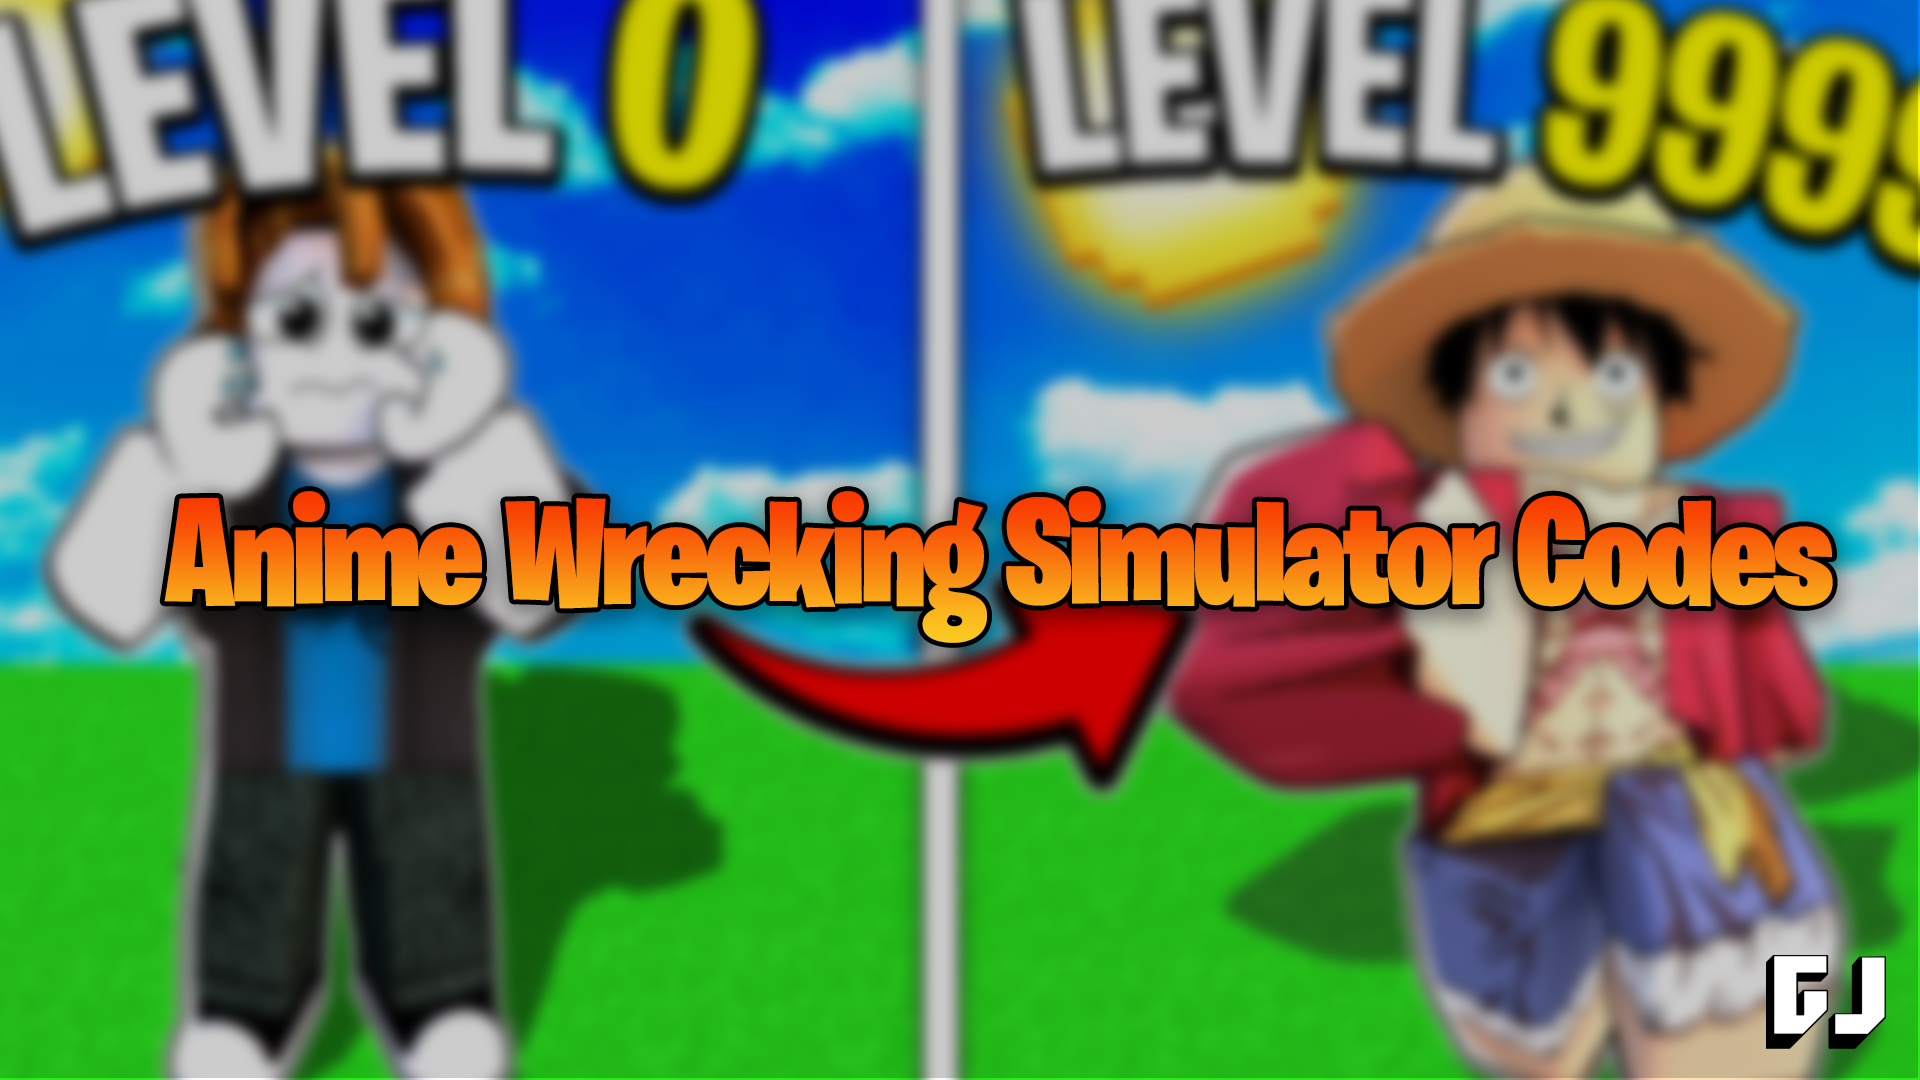 Anime Wrecking Simulator codes  free boosts coins and more  Pocket  Tactics